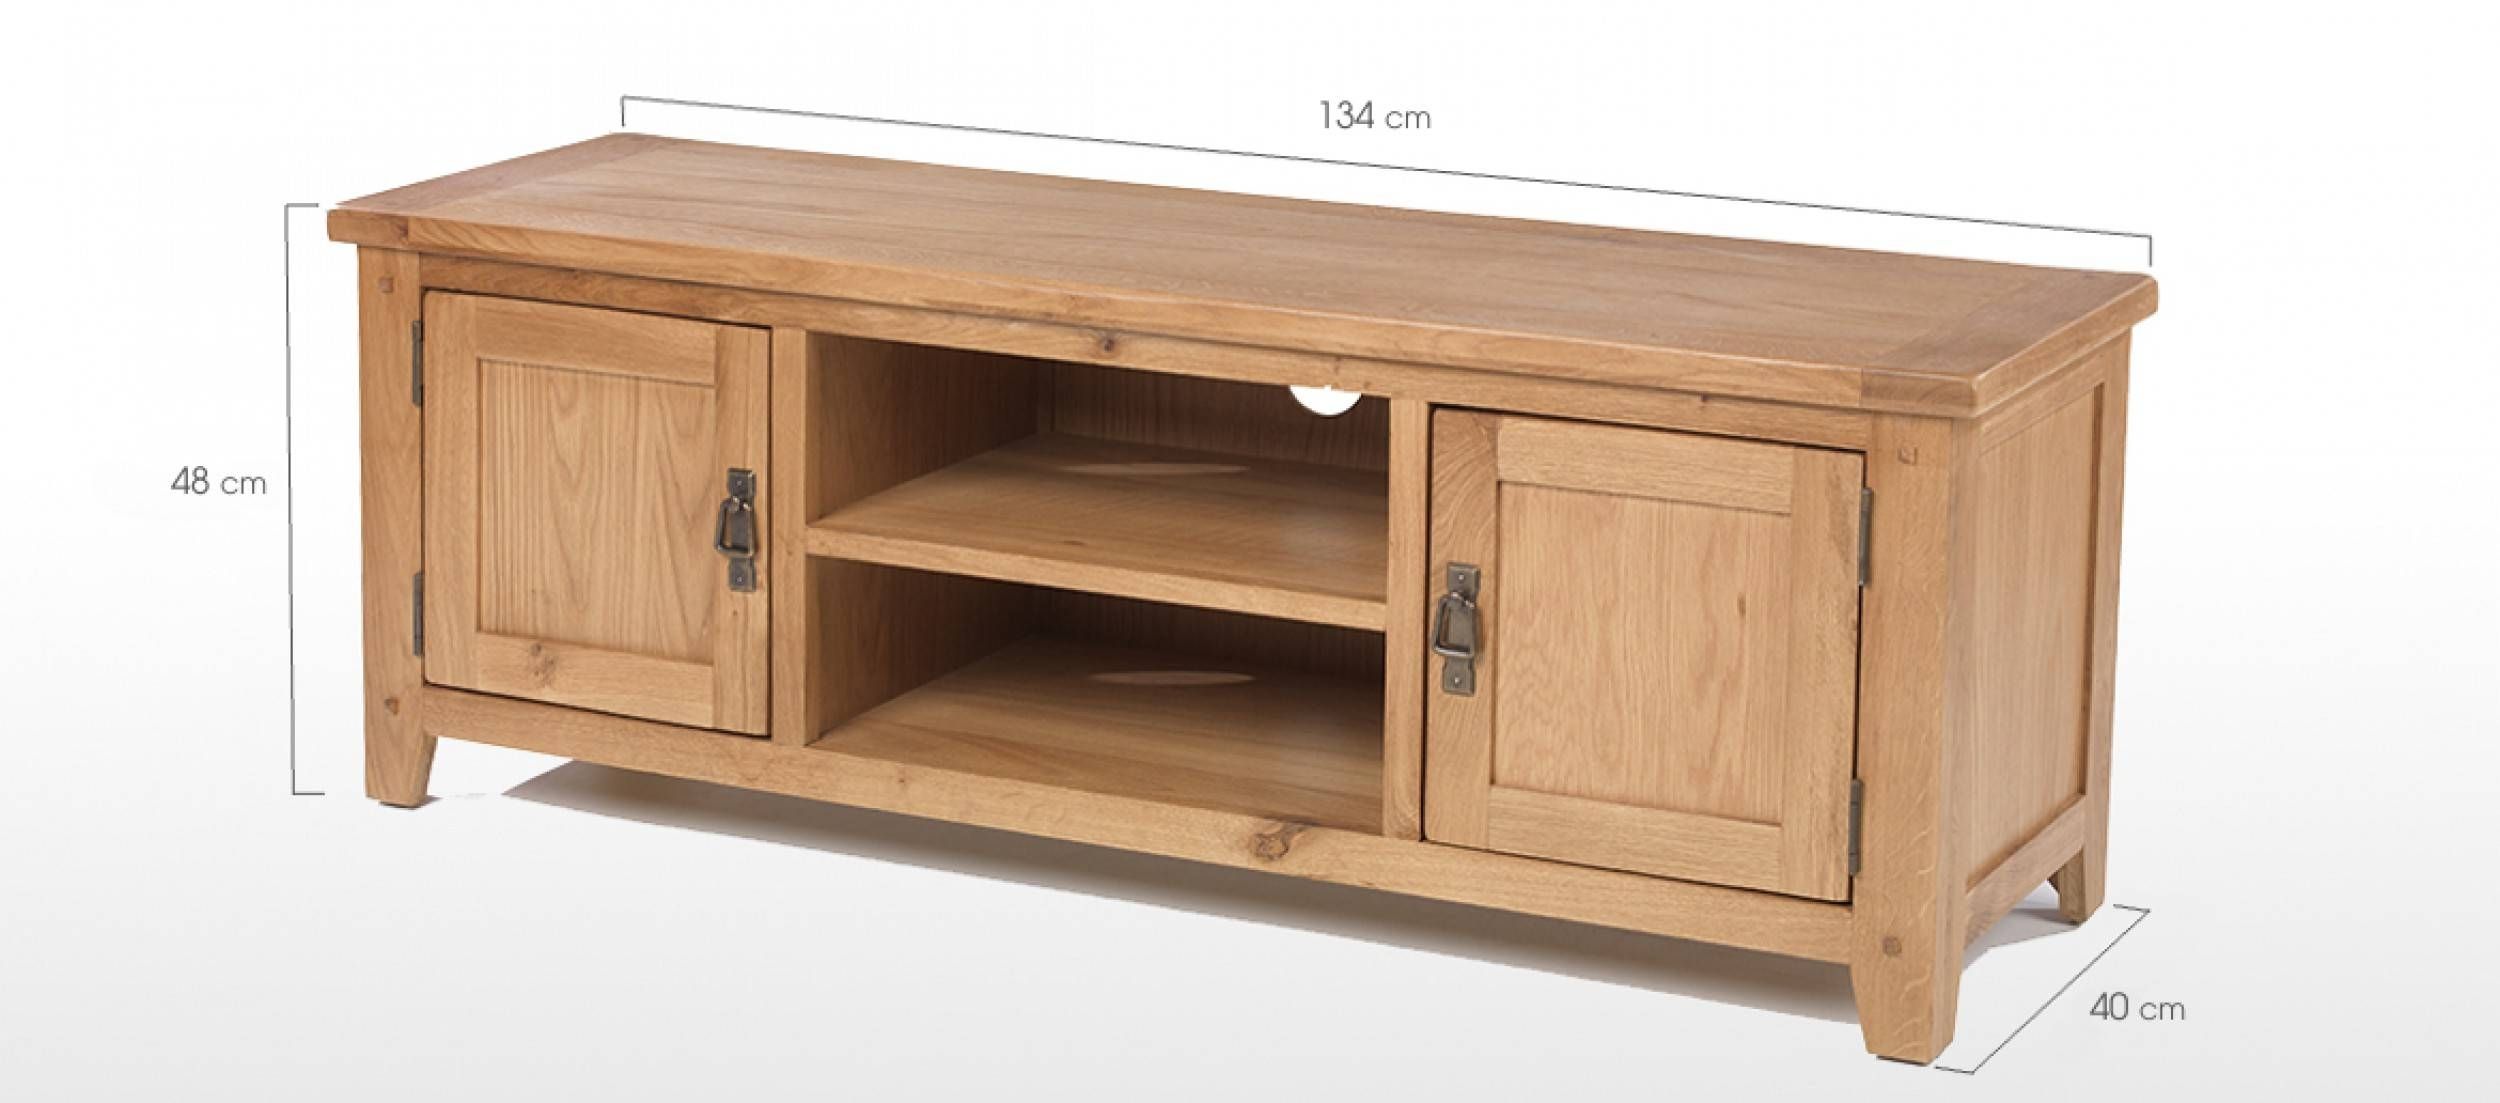 Rustic Oak Plasma Tv Stand | Quercus Living Throughout Rustic Oak Tv Stands (View 3 of 15)